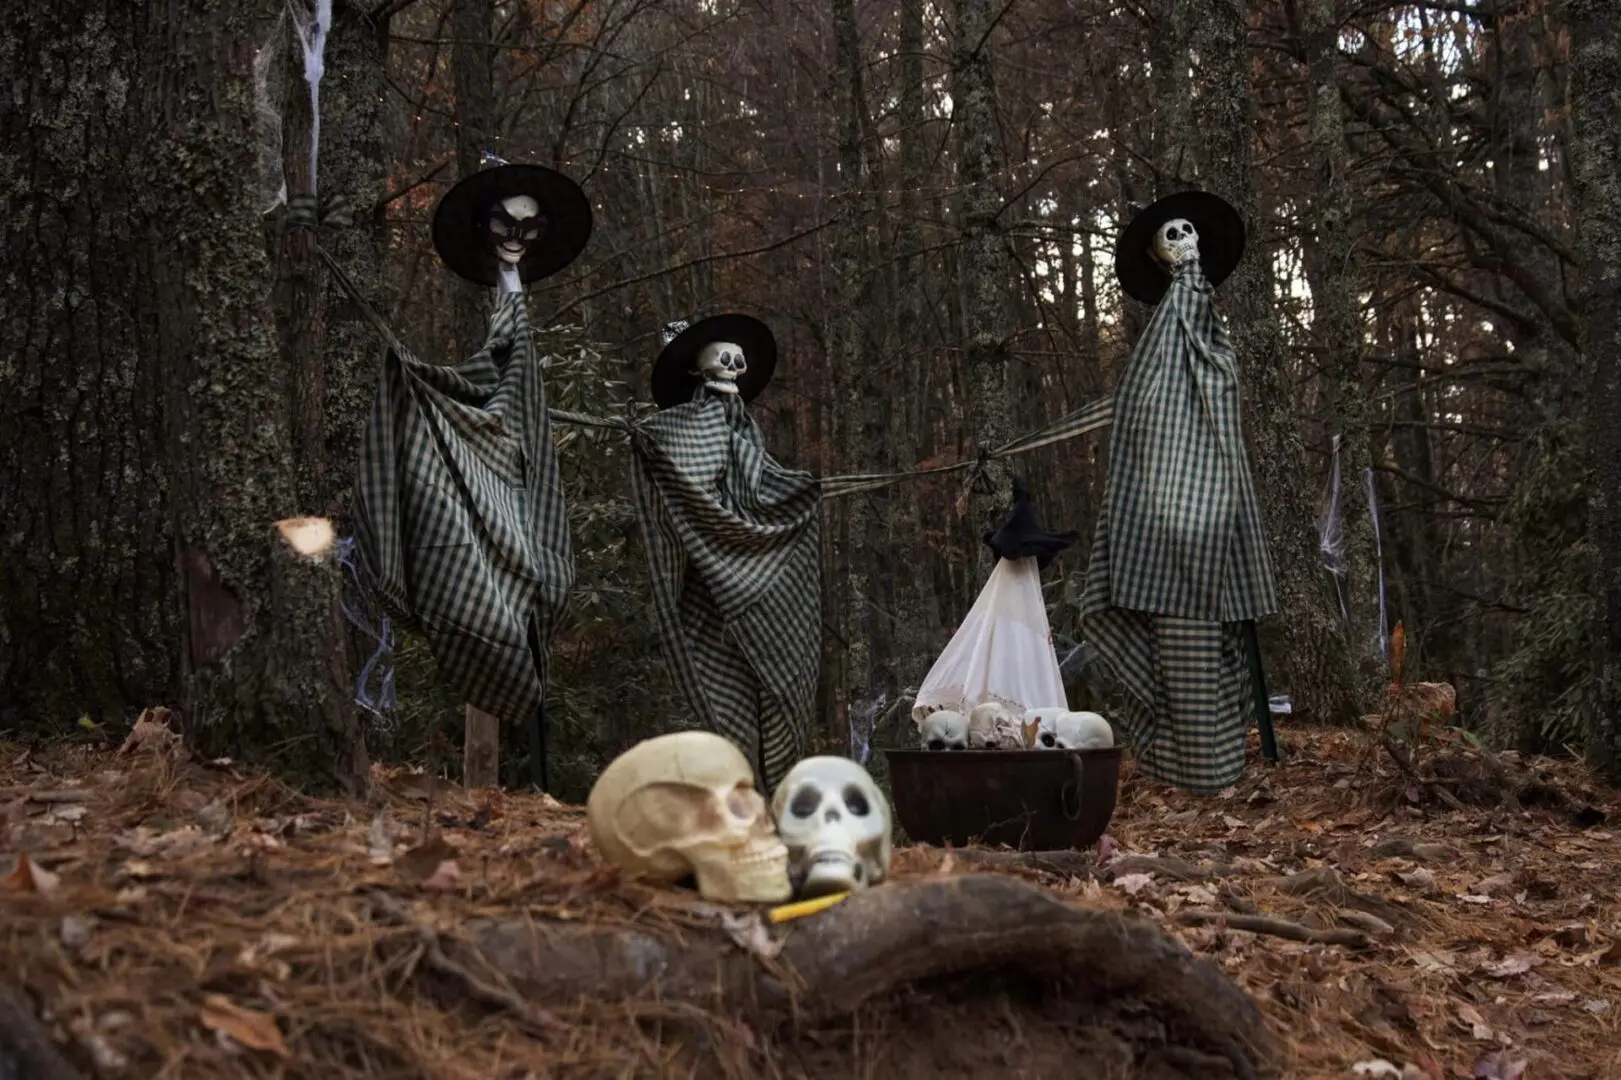 A group of people in the woods with skulls.